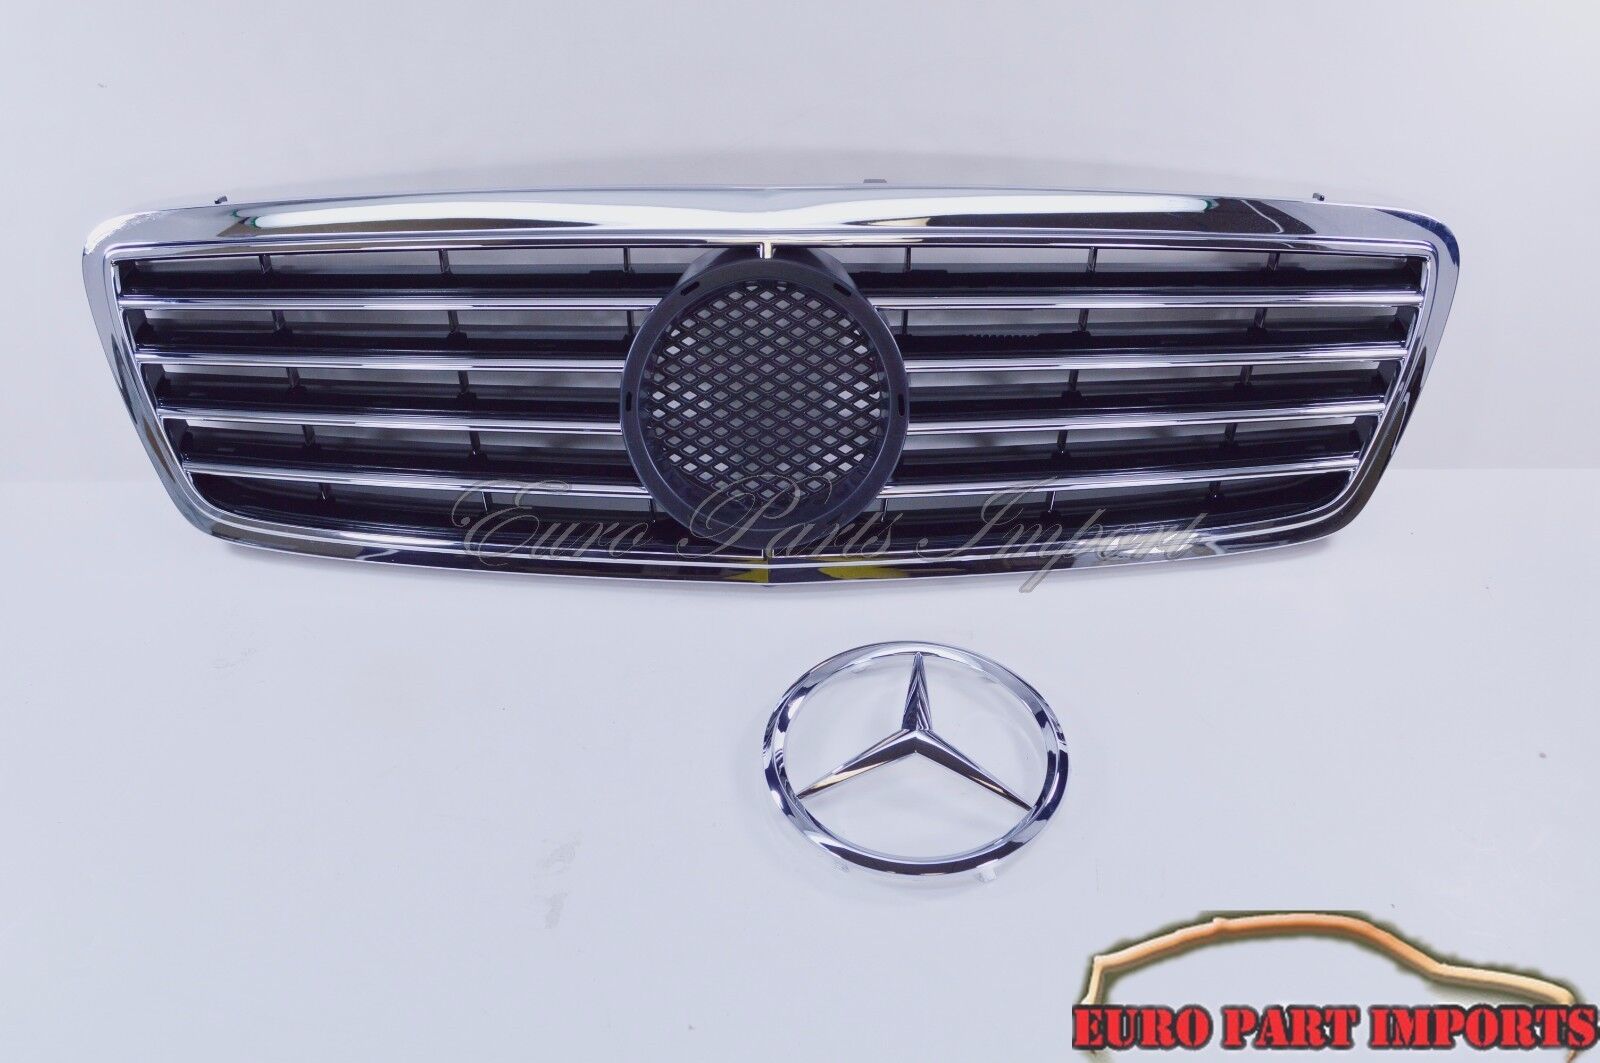 Mercedes-Benz W203 C-Class Front Hood Sport Black Grill Grille germany